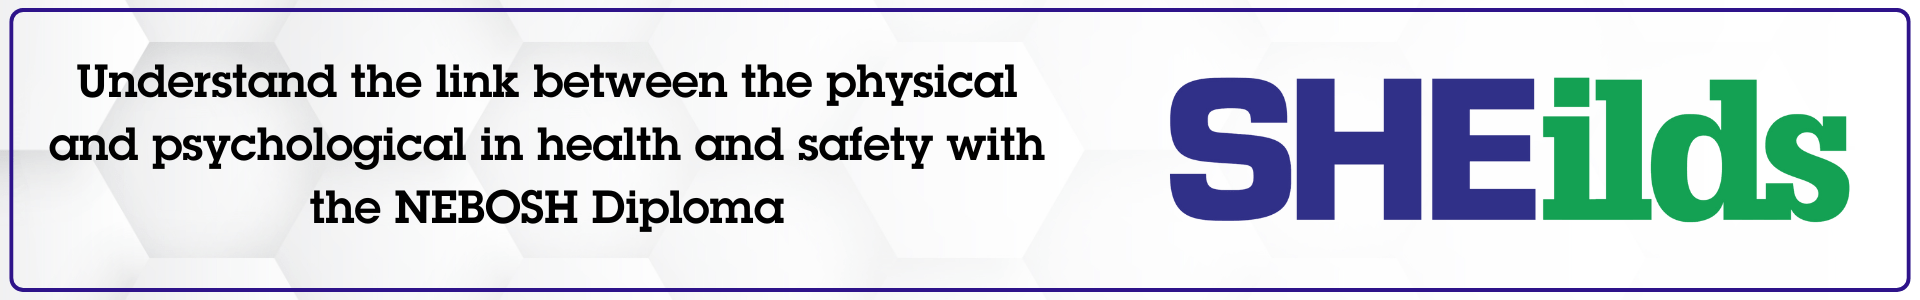 Link between the physical and psychological in health and safety with the NEBOSH DIploma